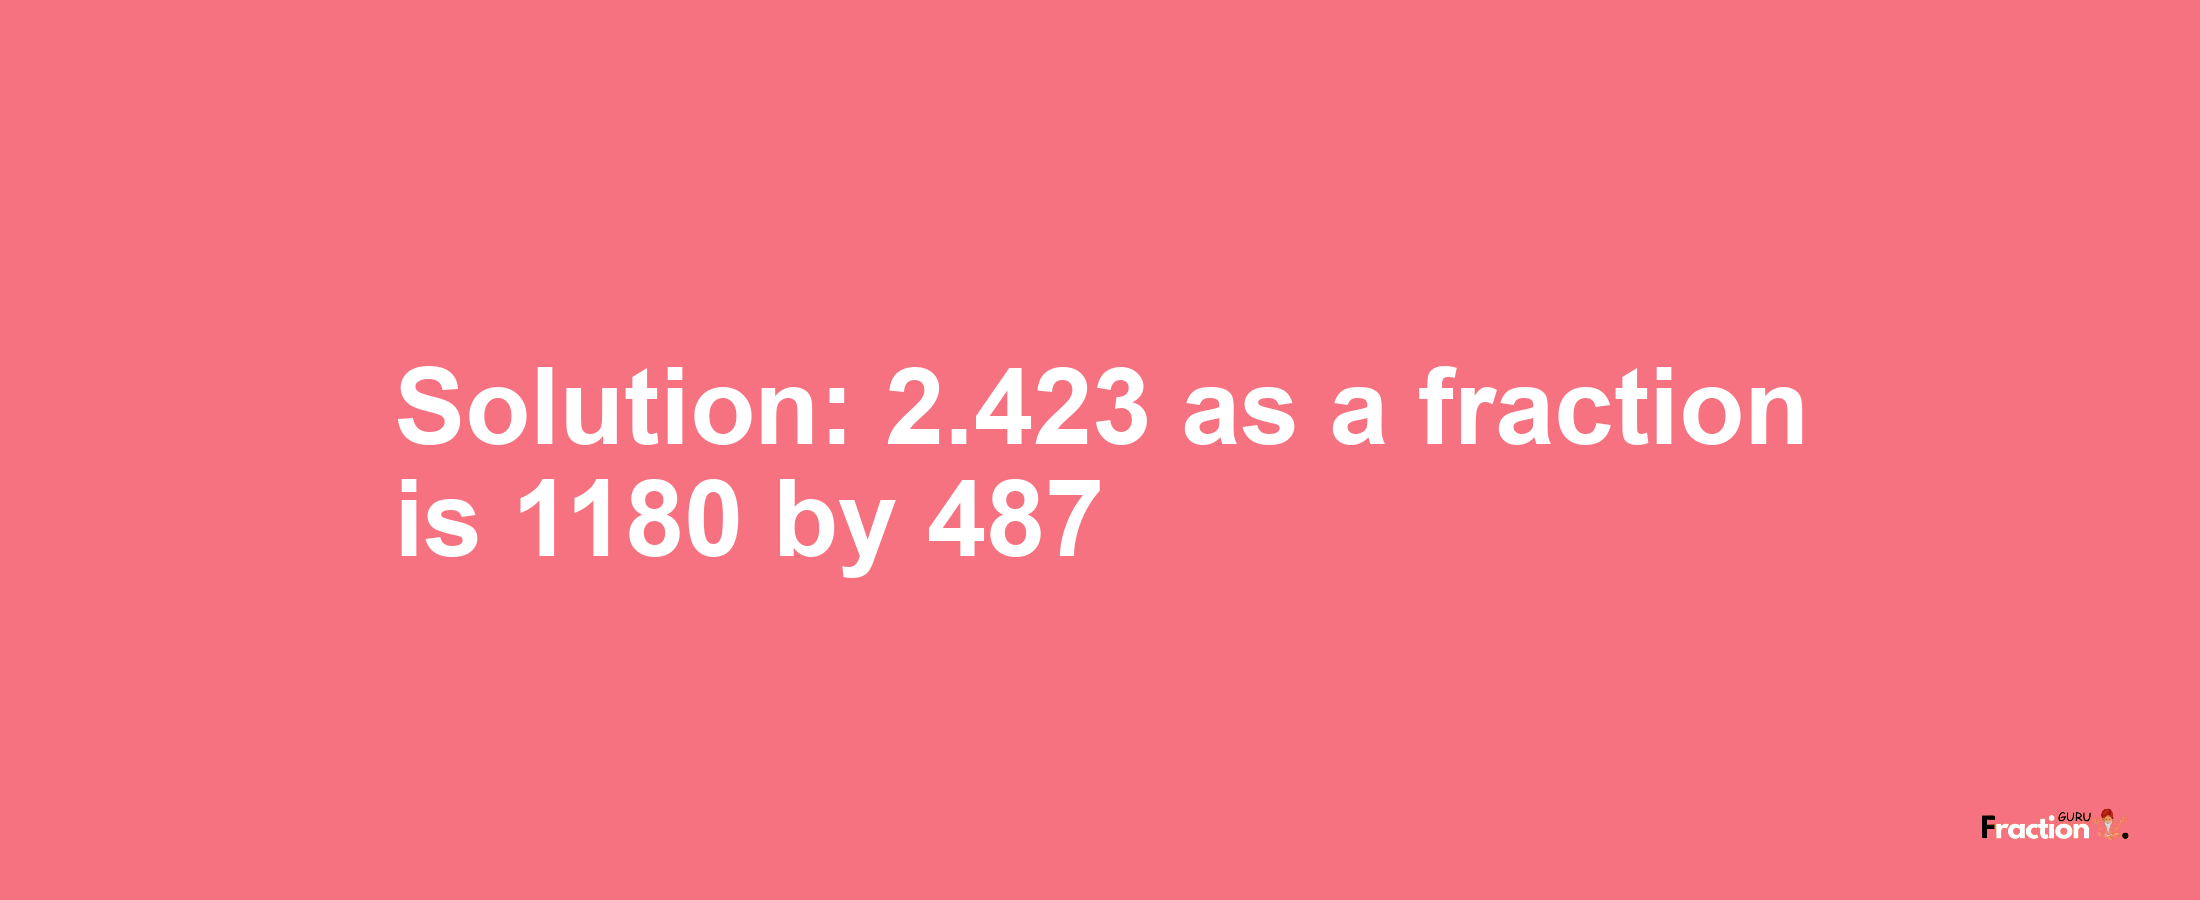 Solution:2.423 as a fraction is 1180/487